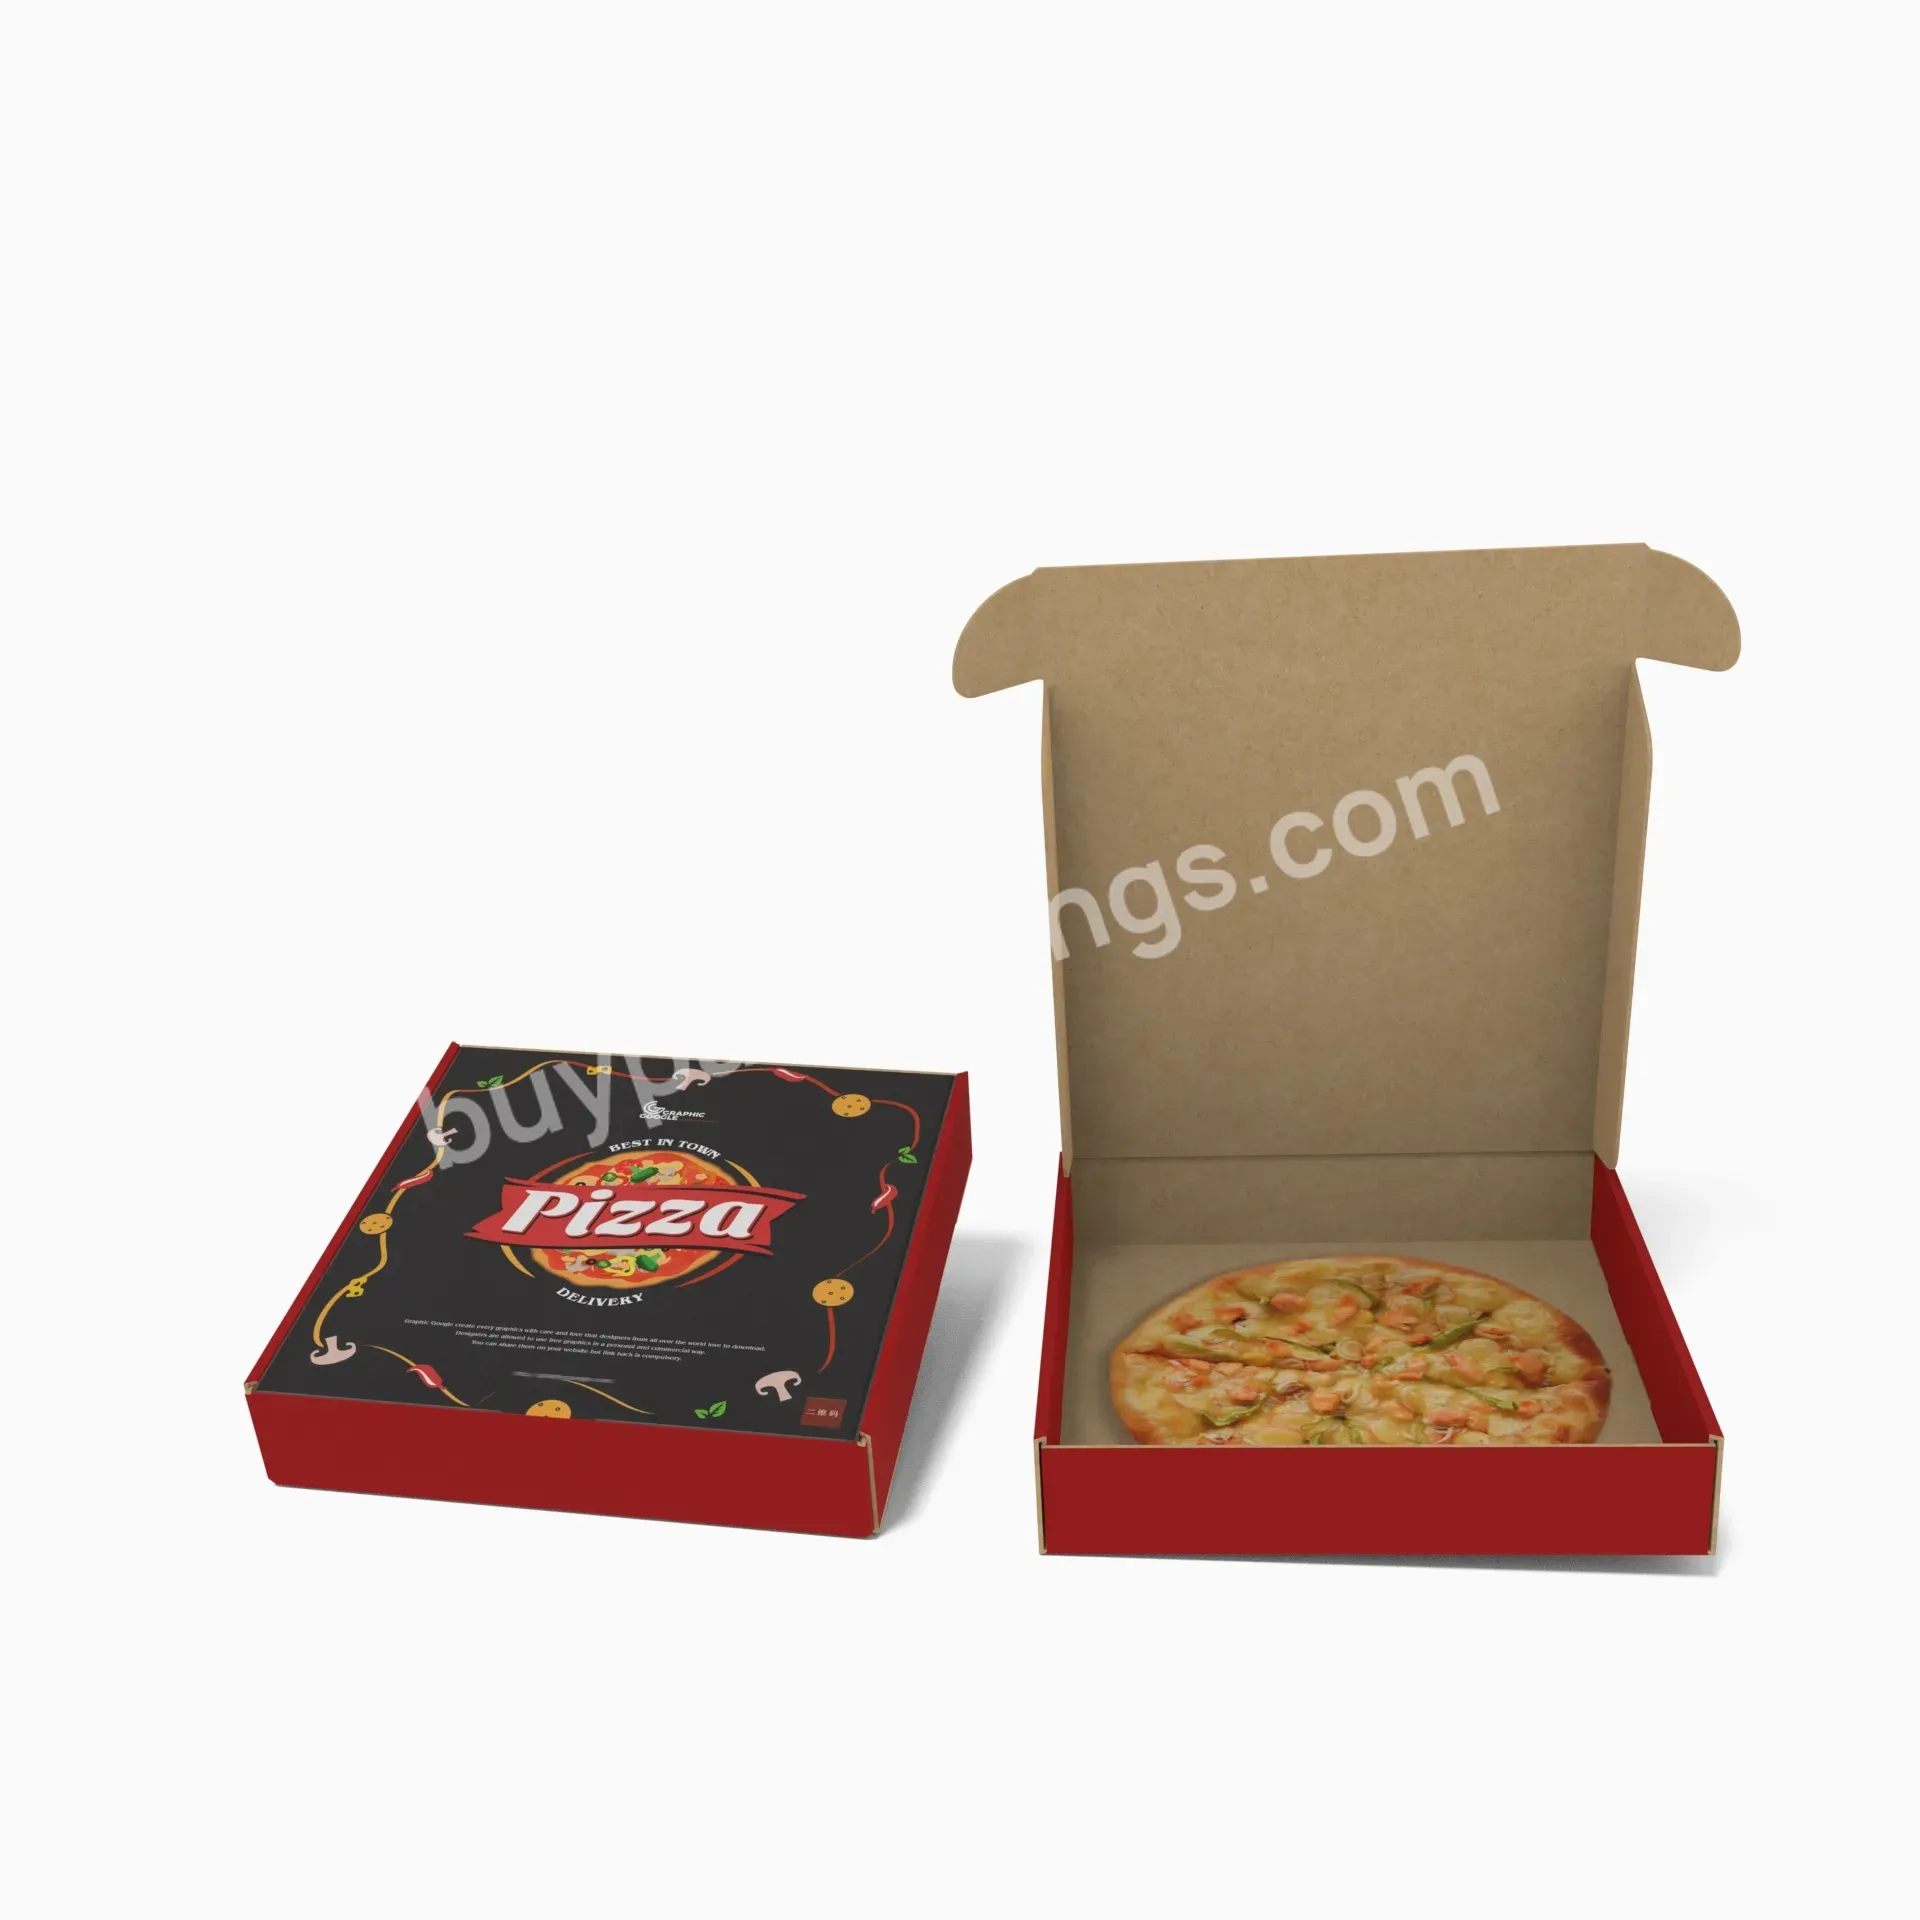 Wholesale Pizza Box Package Carton Supplier Custom Design Printed Packing Bulk Cheap Pizza Boxes With Your Own Logo